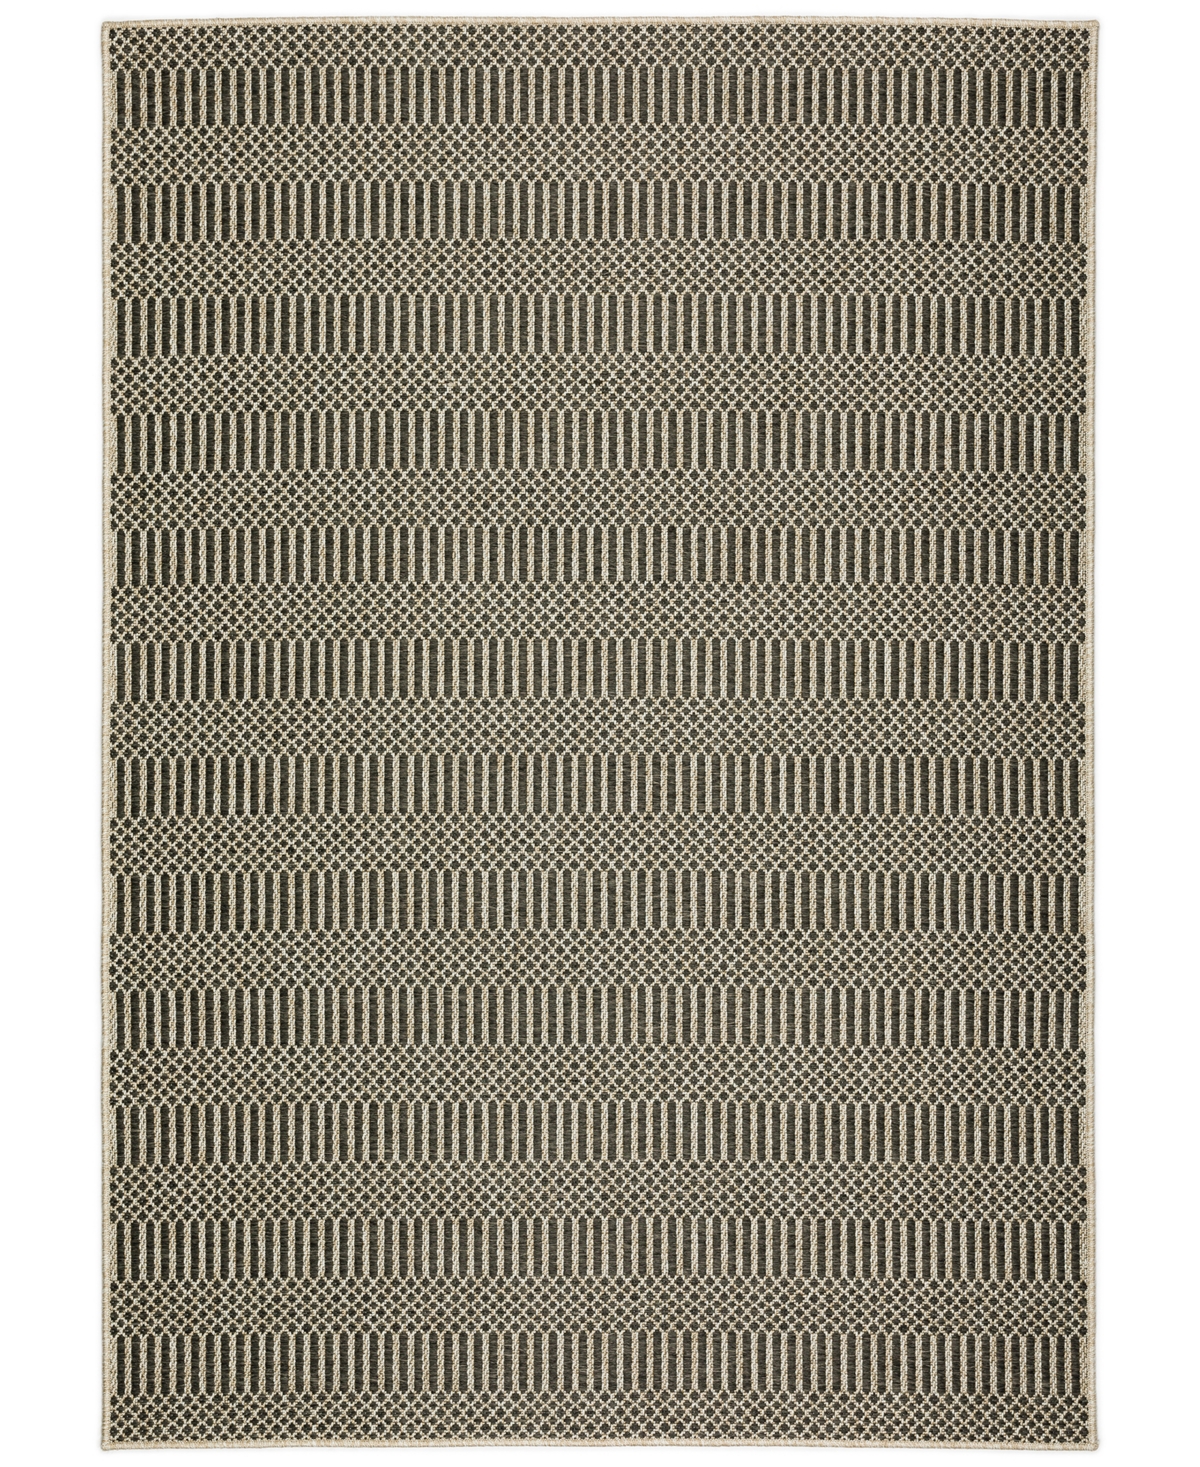 D Style Nusa Outdoor Nsa4 1'8" X 2'6" Area Rug In Charcoal